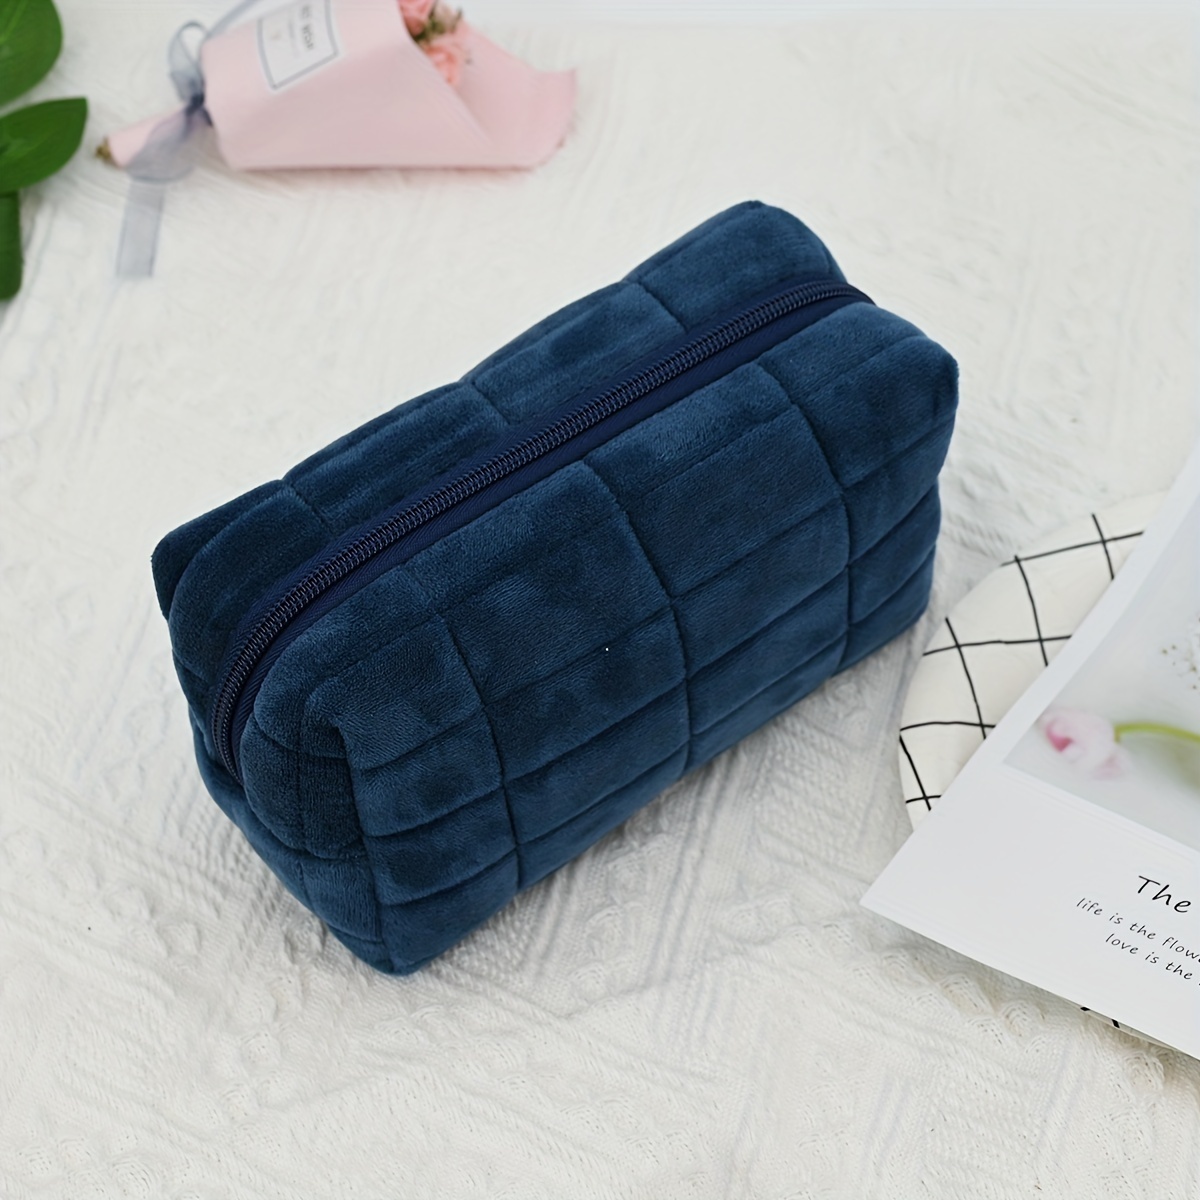 Ins Checkerboard Knitted Cosmetic Bag For Women Large-Capacity